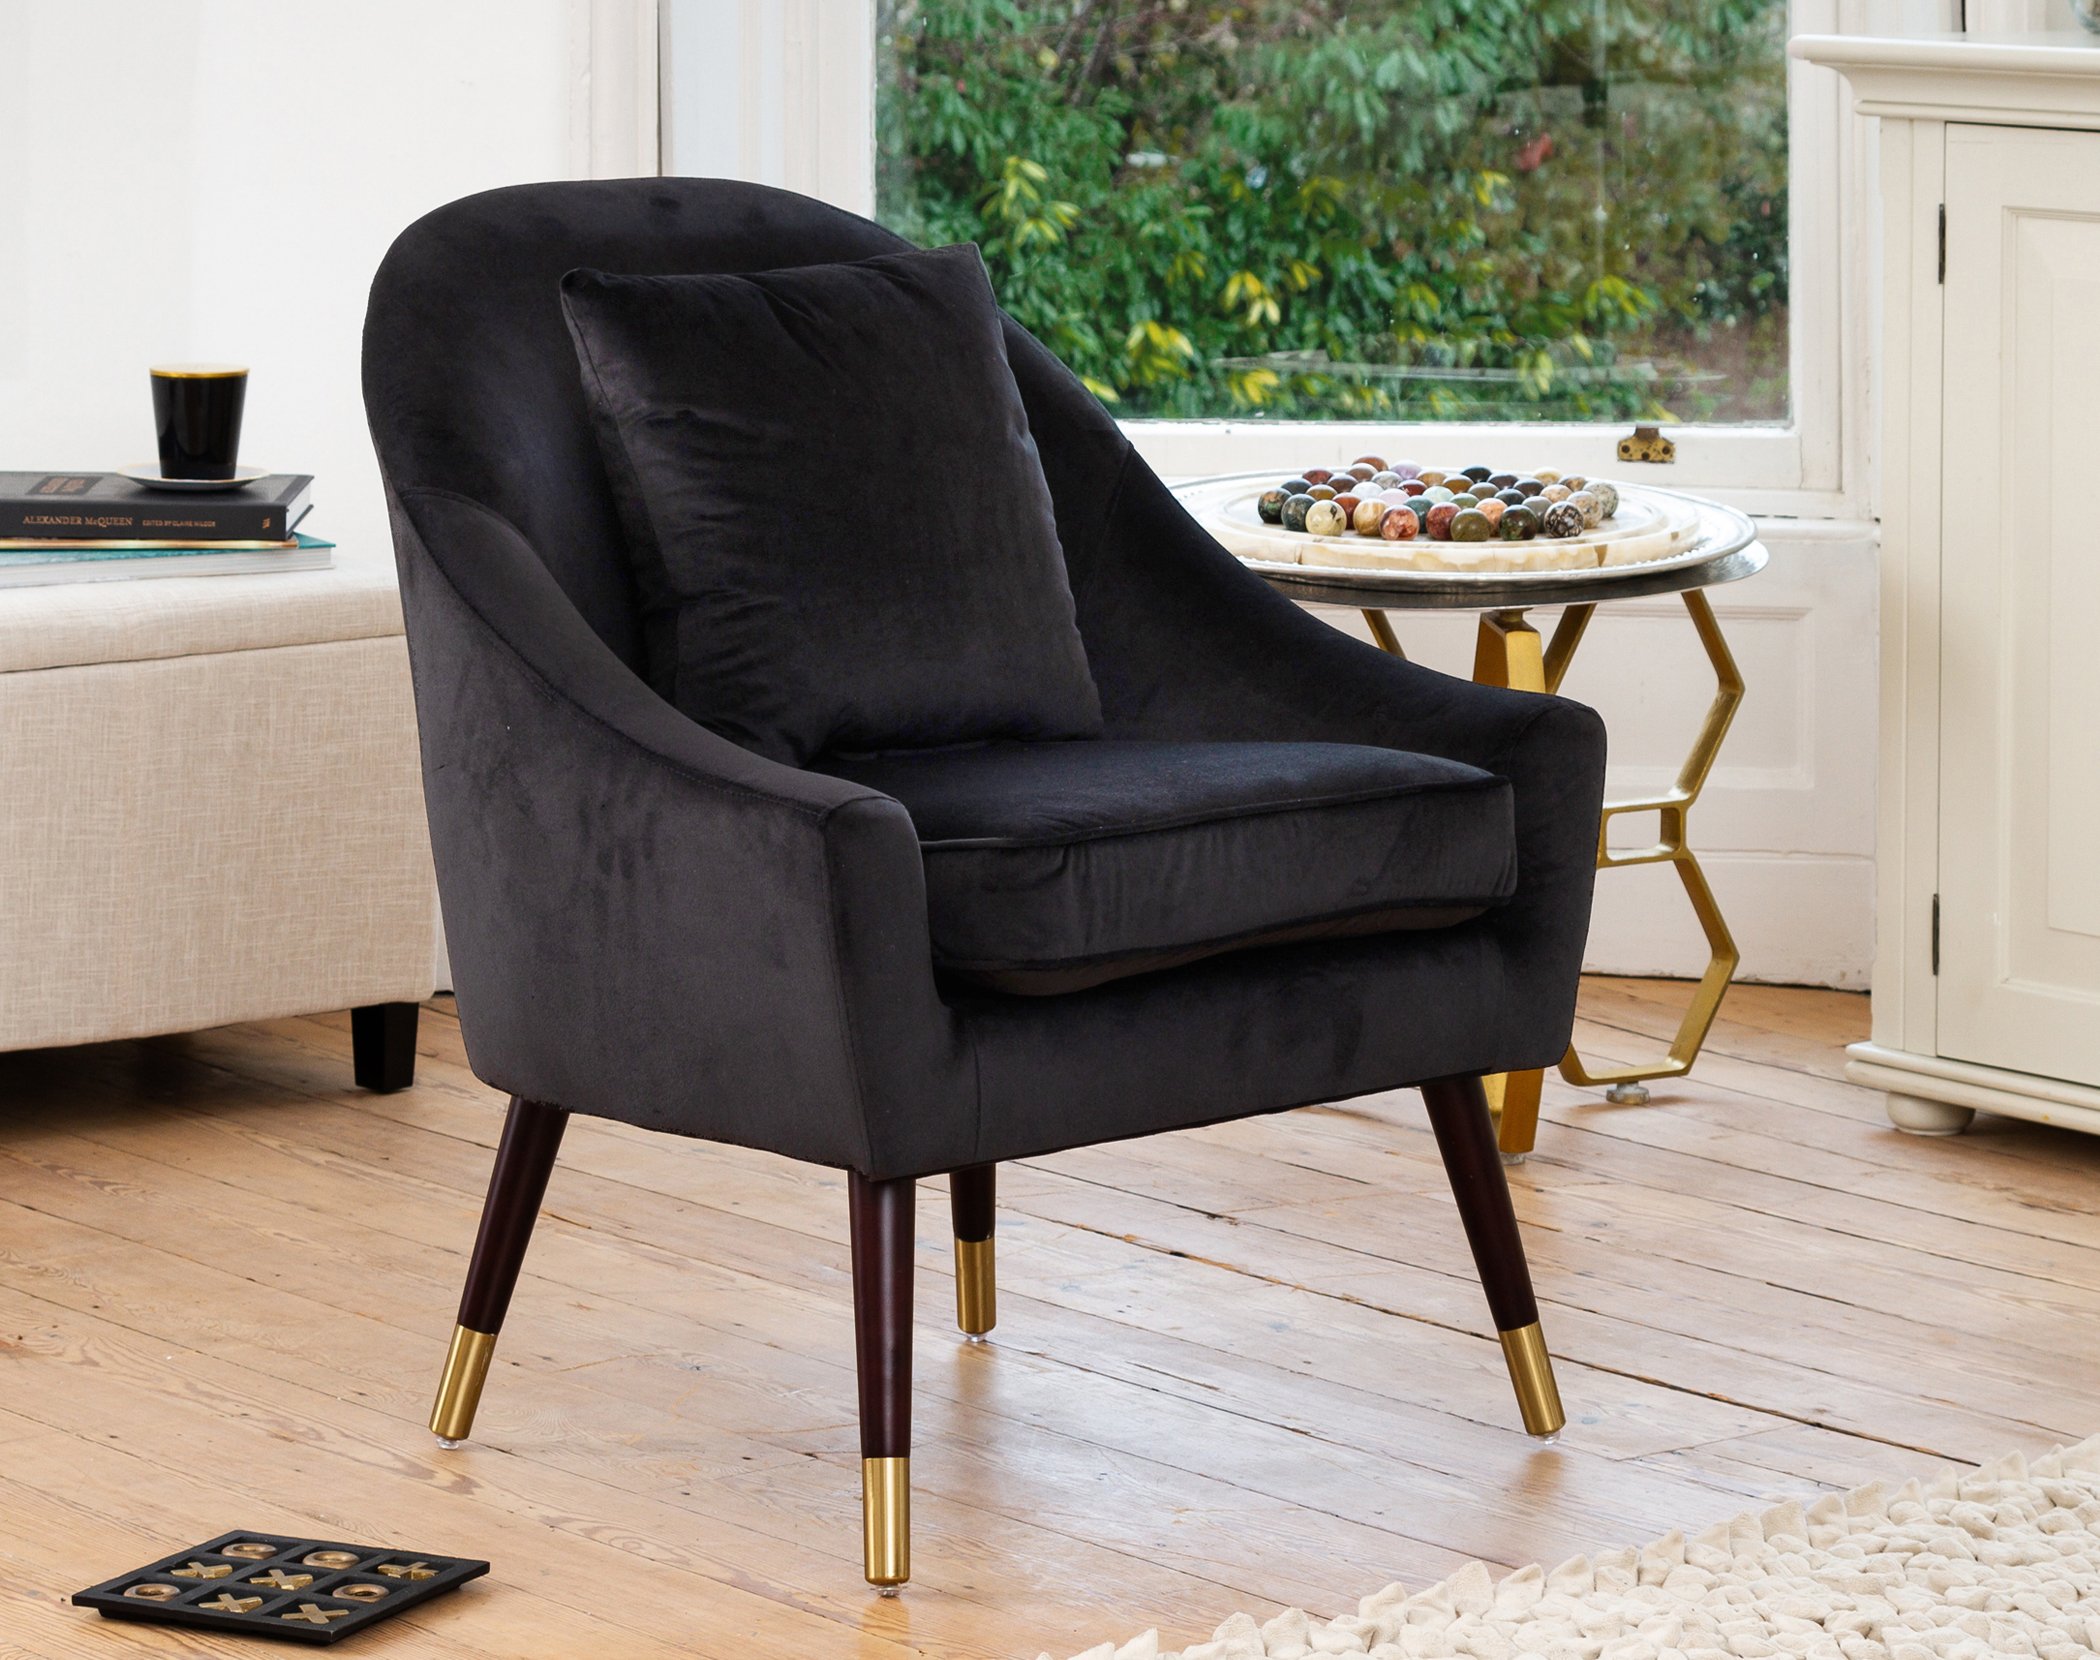 Hardy accent chair black at The Sofa Company